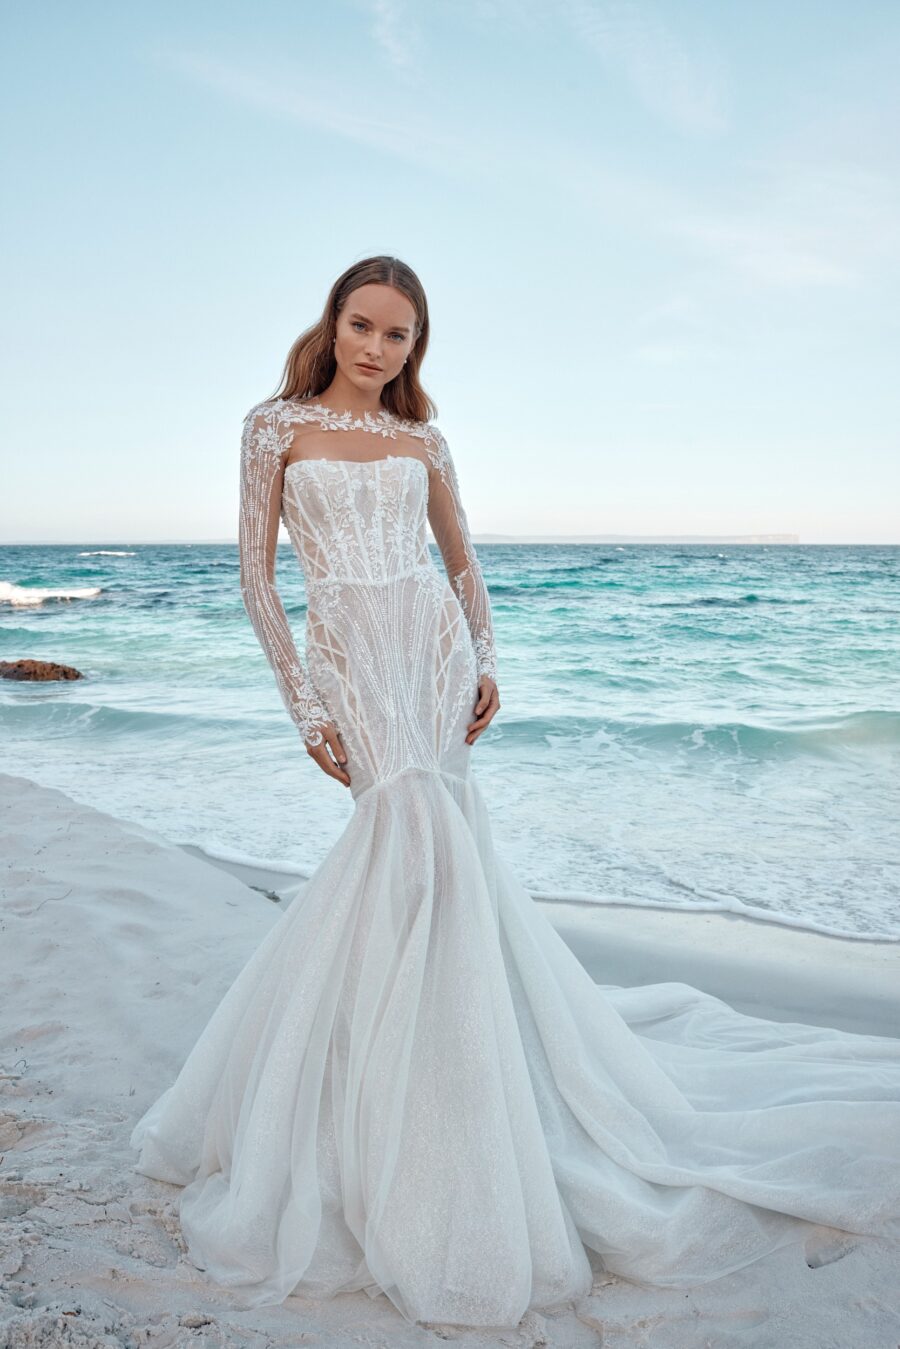 Remy 3 wedding dress by woná concept from atelier signature collection